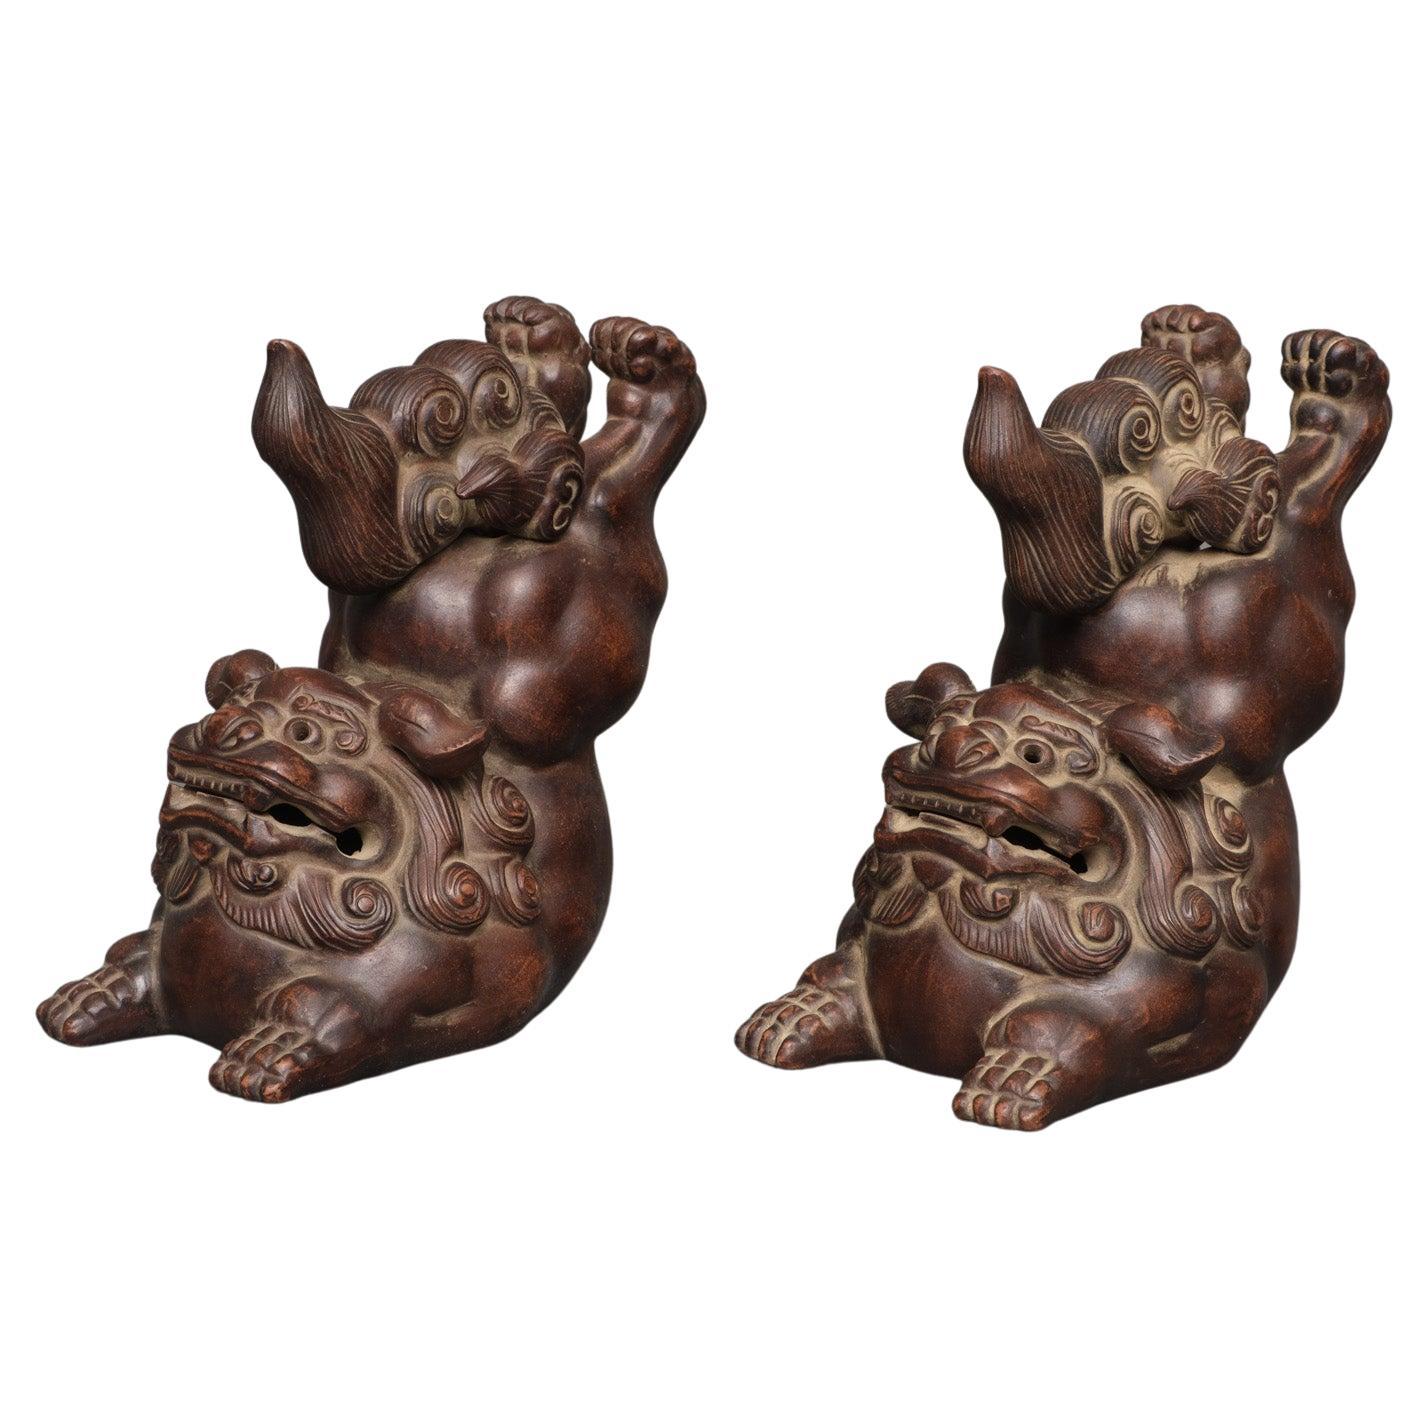 Pair of Chinese Yixing Ware Figures of Temple Lions, by the Artist Li Jun